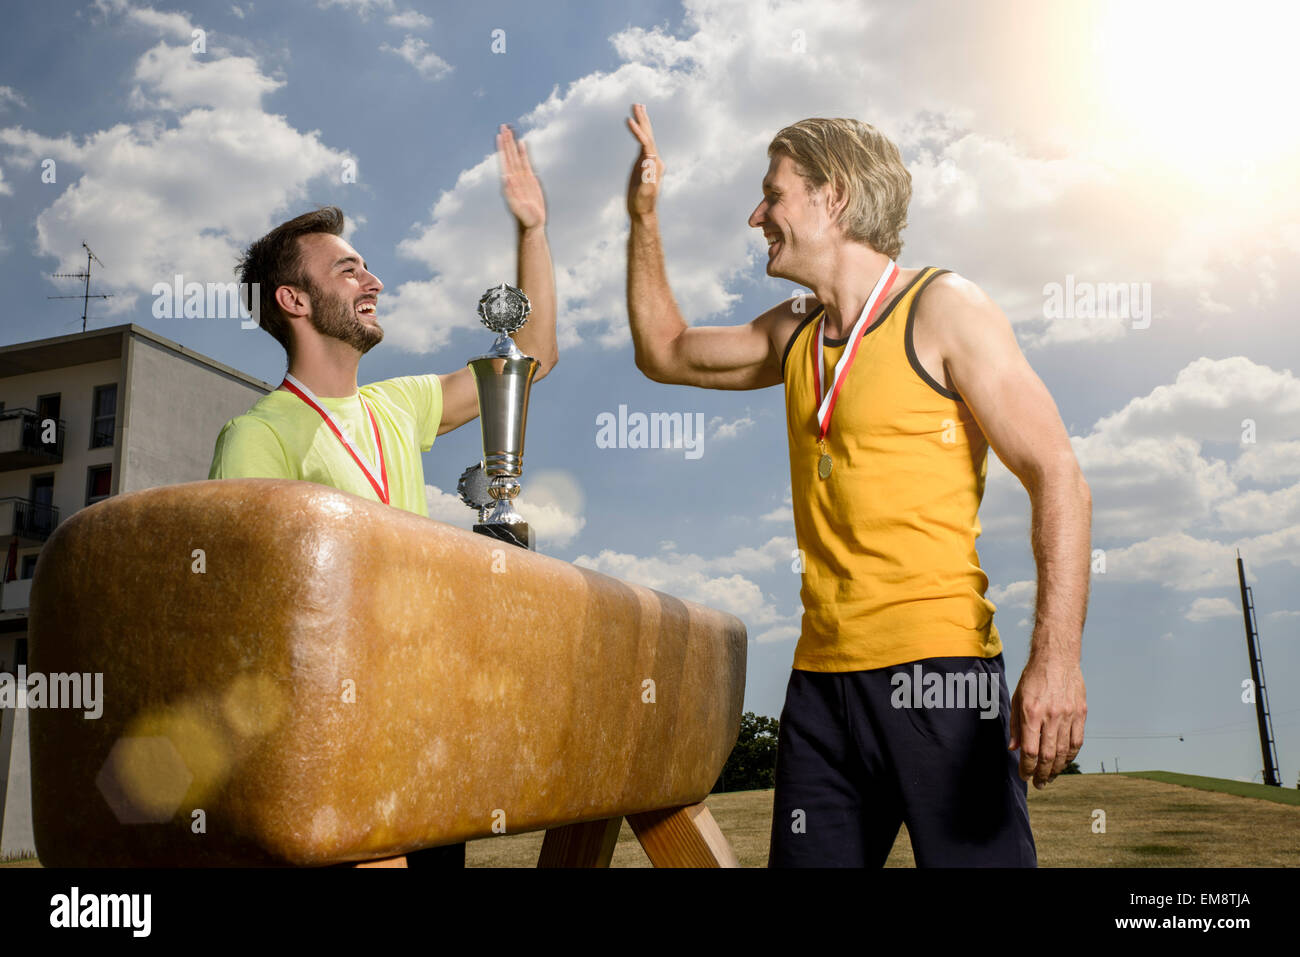 Two male gymnasts with trophy and medals giving each other high five Stock Photo